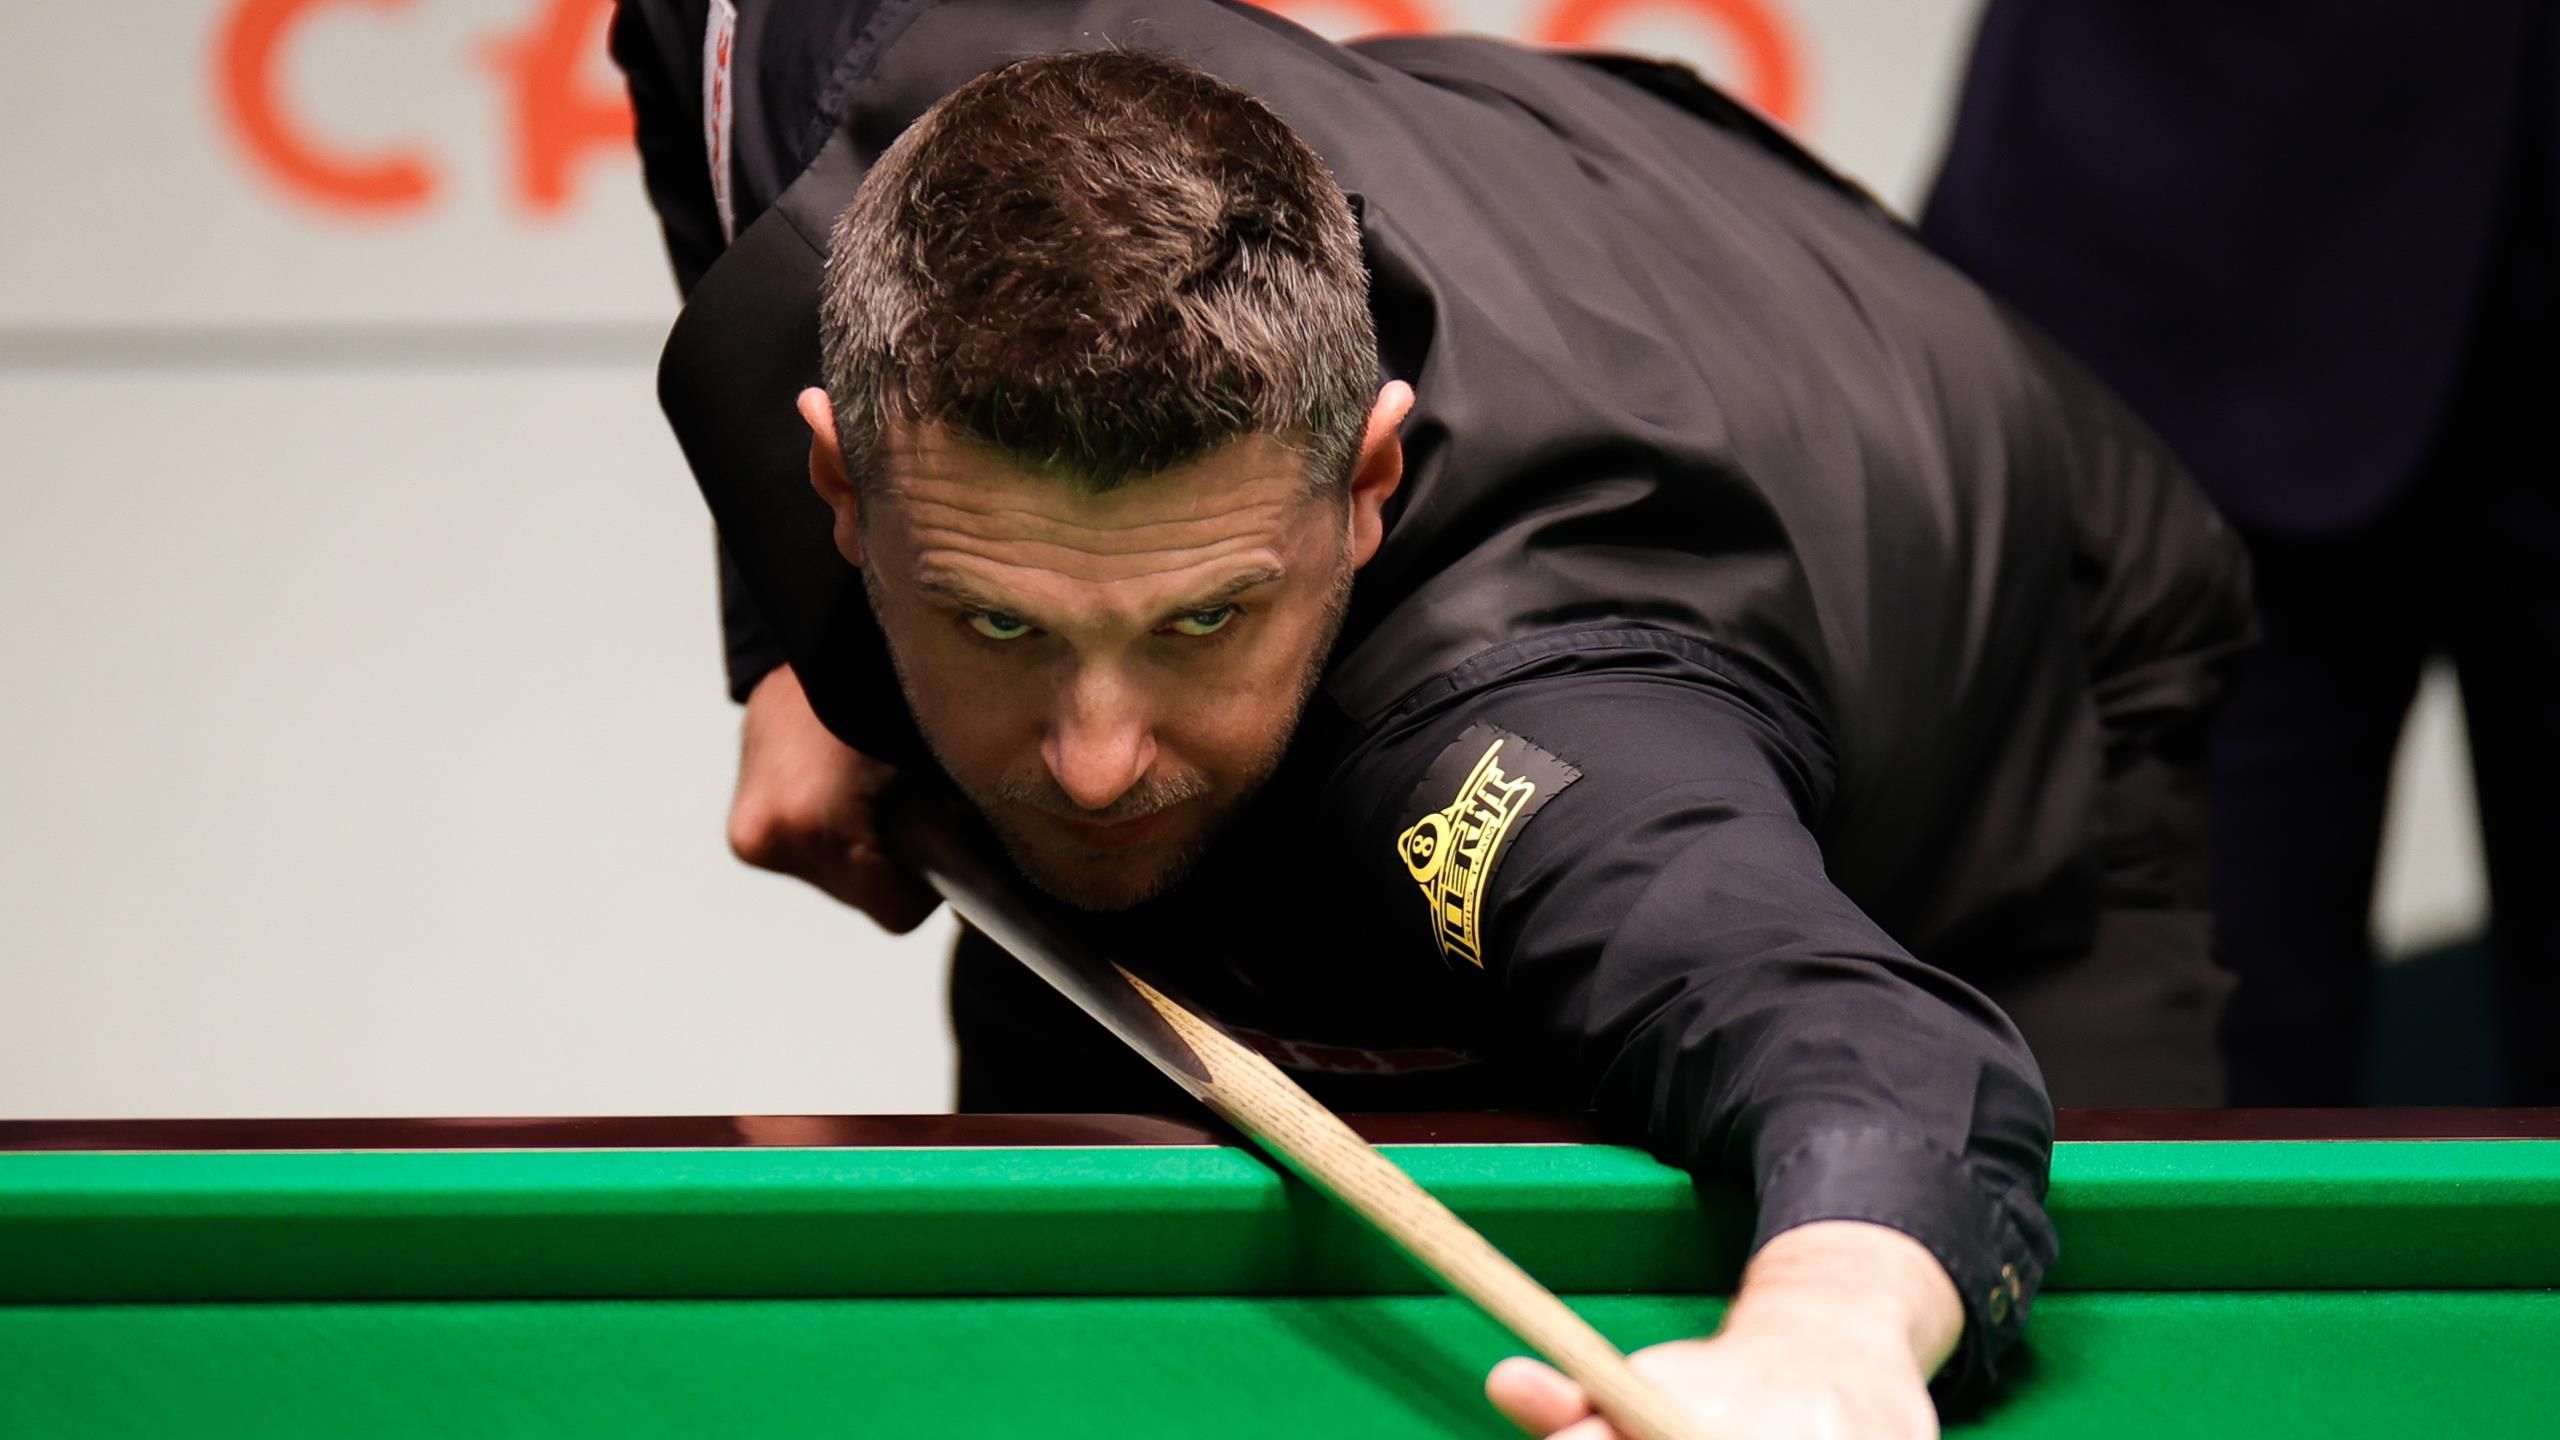 World Snooker Championship 2023: Mark Selby edges past Matthew Selt as he  starts quest for fifth Crucible title - Eurosport